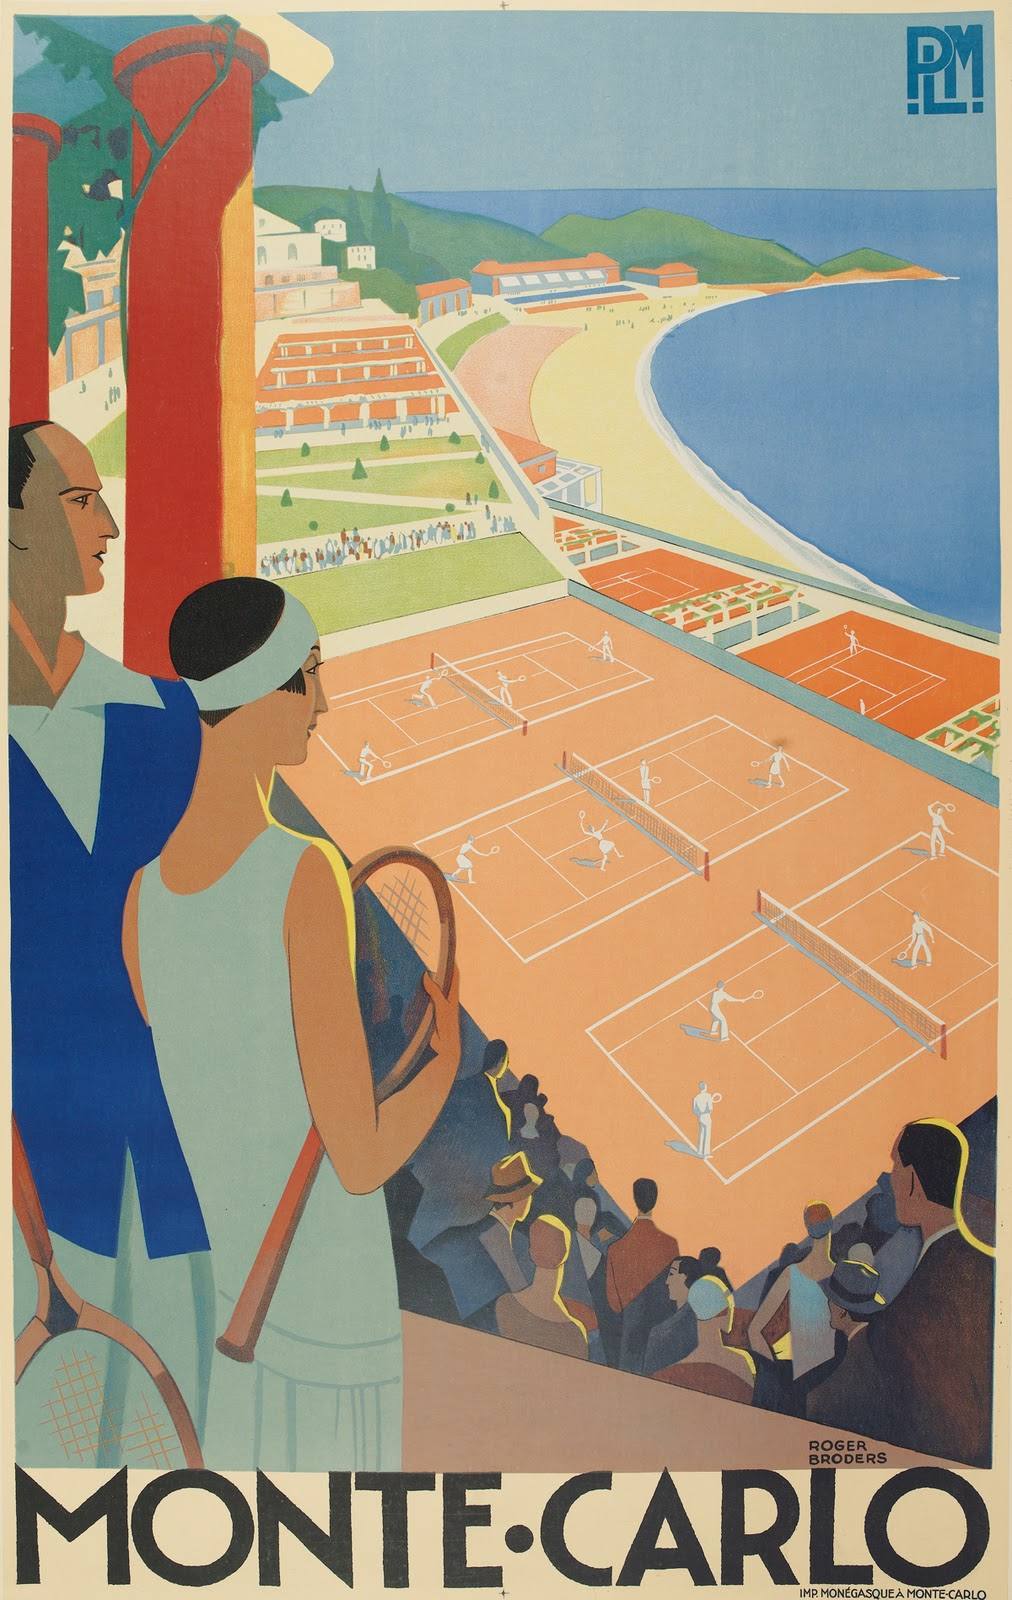 15 Beautiful French Art-Deco Travel Posters by Roger Broders - Flashbak